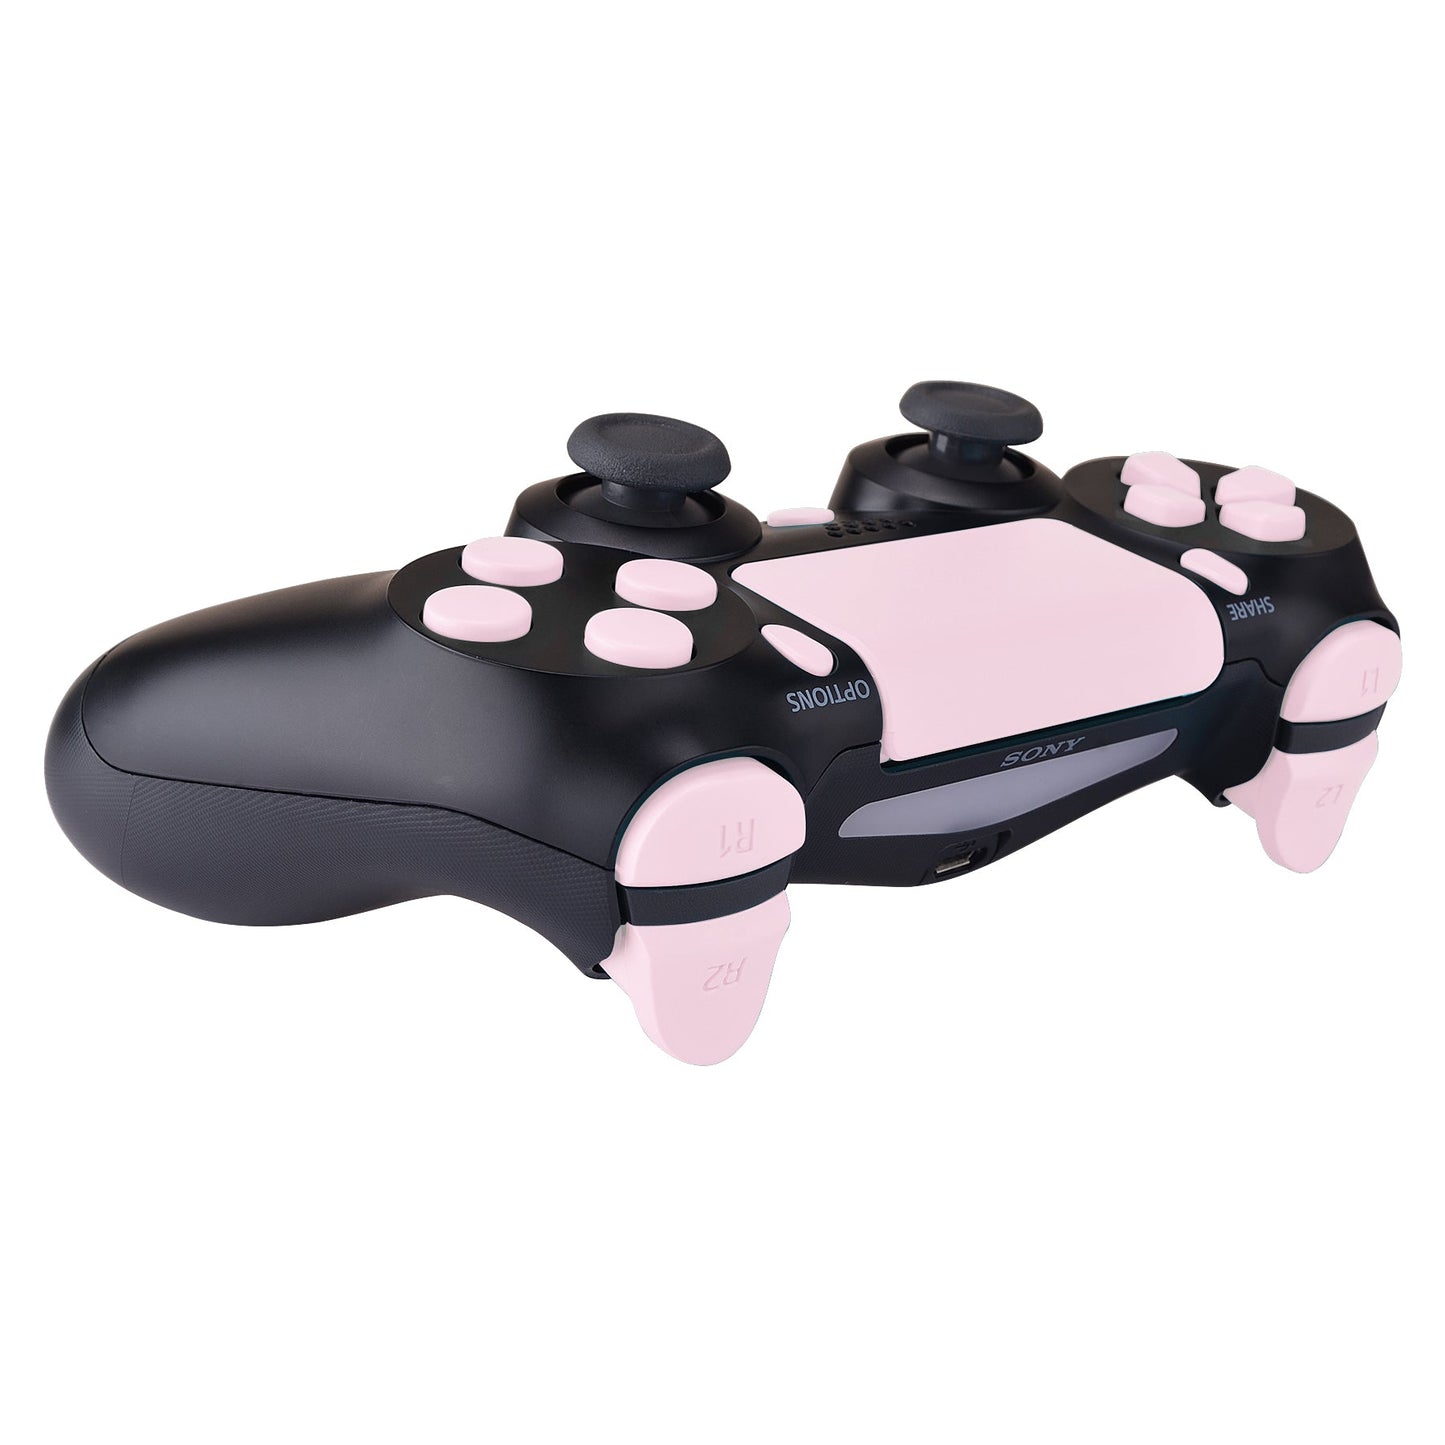 eXtremeRate Replacement D-pad – Repair Action ps4 Cherry Slim Share Controller, ps4 R2 Pink Full Options Controller Triggers eXtremeRate Buttons Home Buttons Touchpad R1 Kit for Pro for Blossoms L2 Set L1